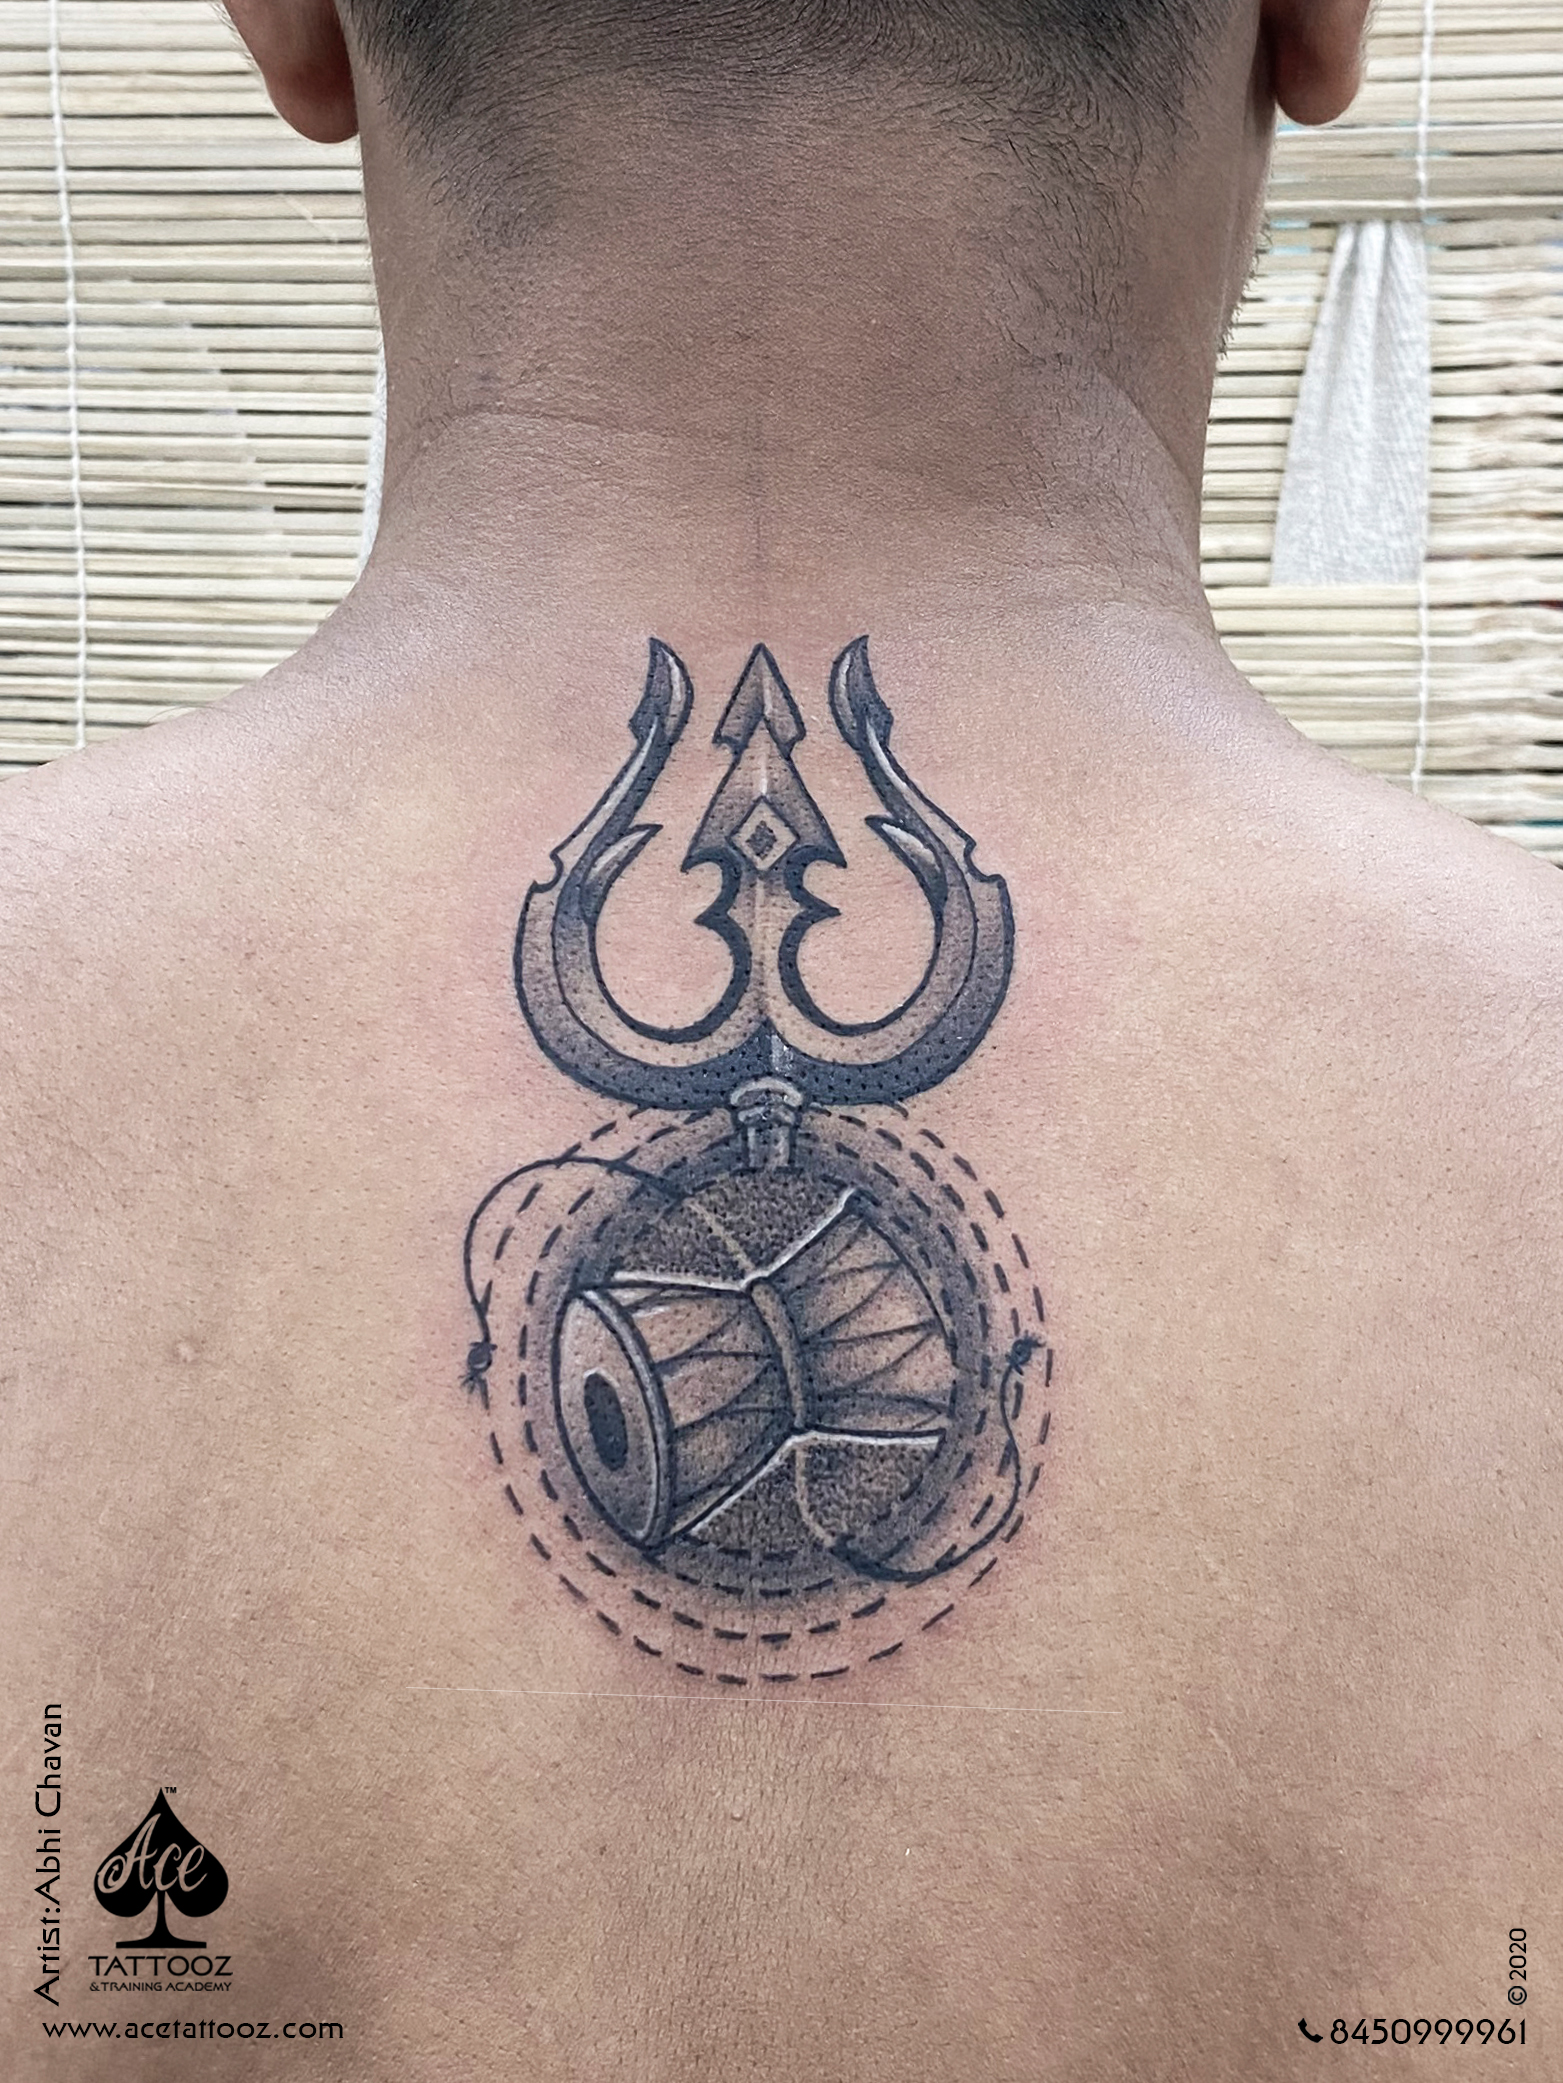 This music themed Shiva tattoo design is the best way to tell the story of  one's faith. Represent your faith through our ink at… | Instagram